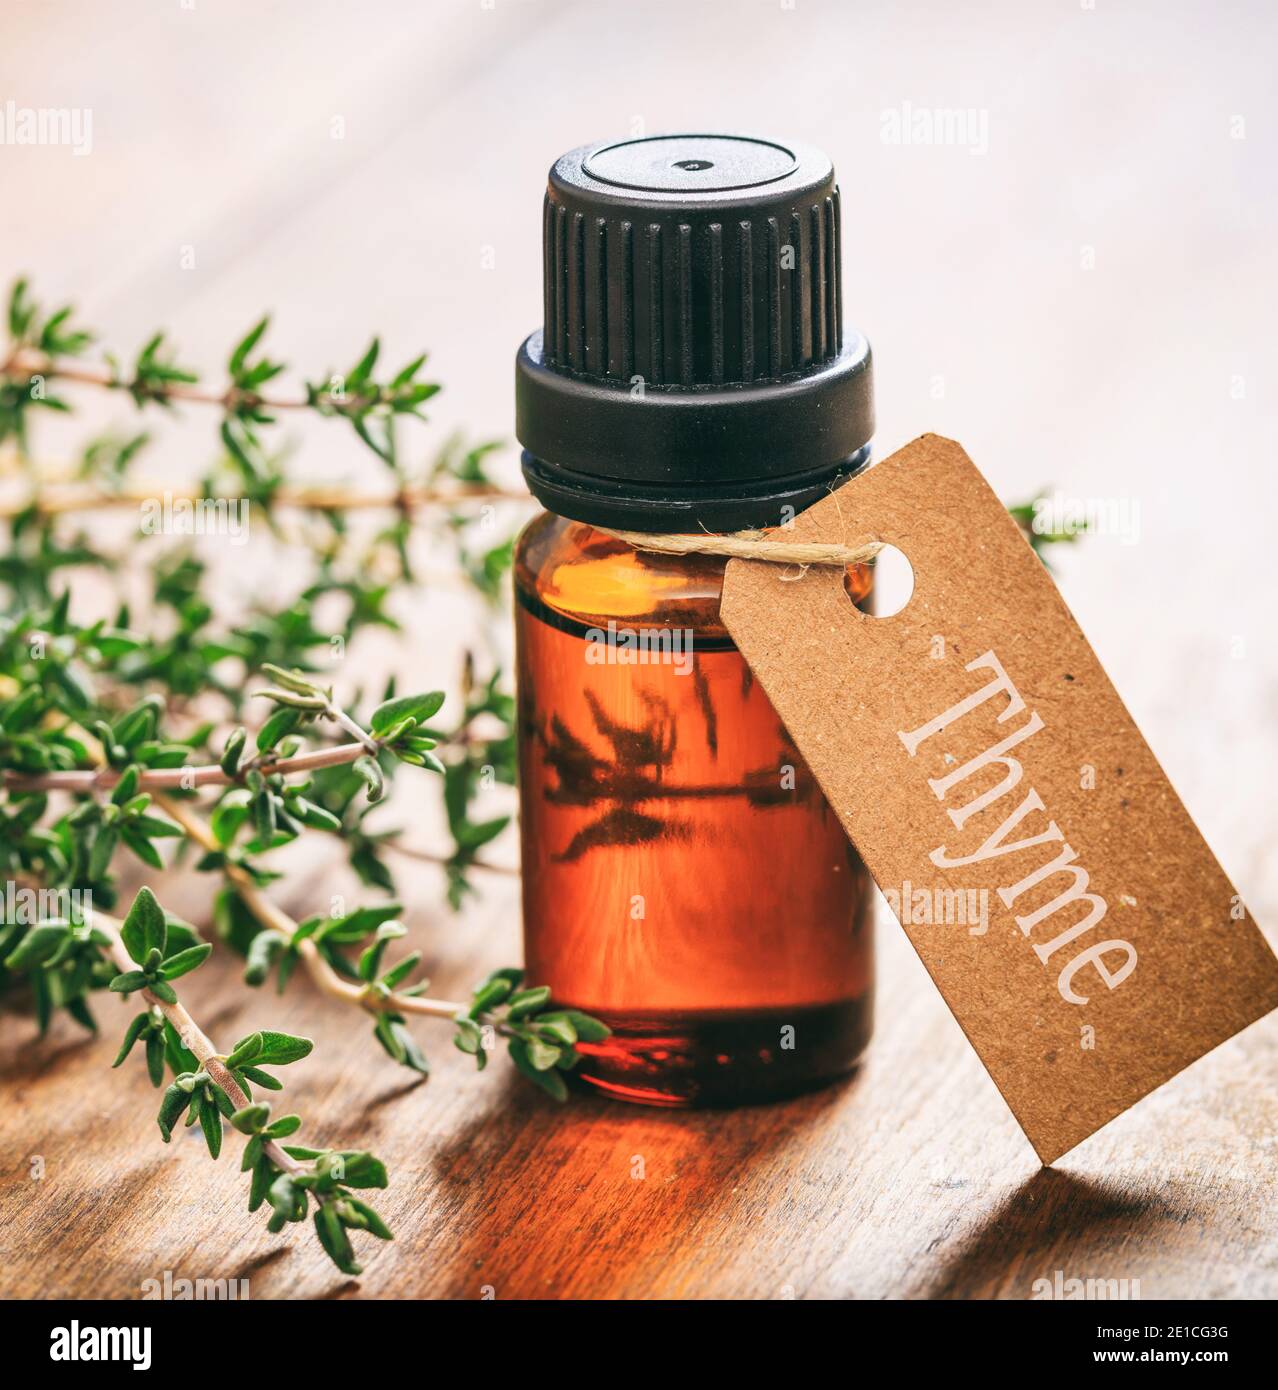 Fresh thyme plant leaves and essential oil on wooden background. Thymus aromatic perennial evergreen herb is a culinary herb used for cooking Stock Photo